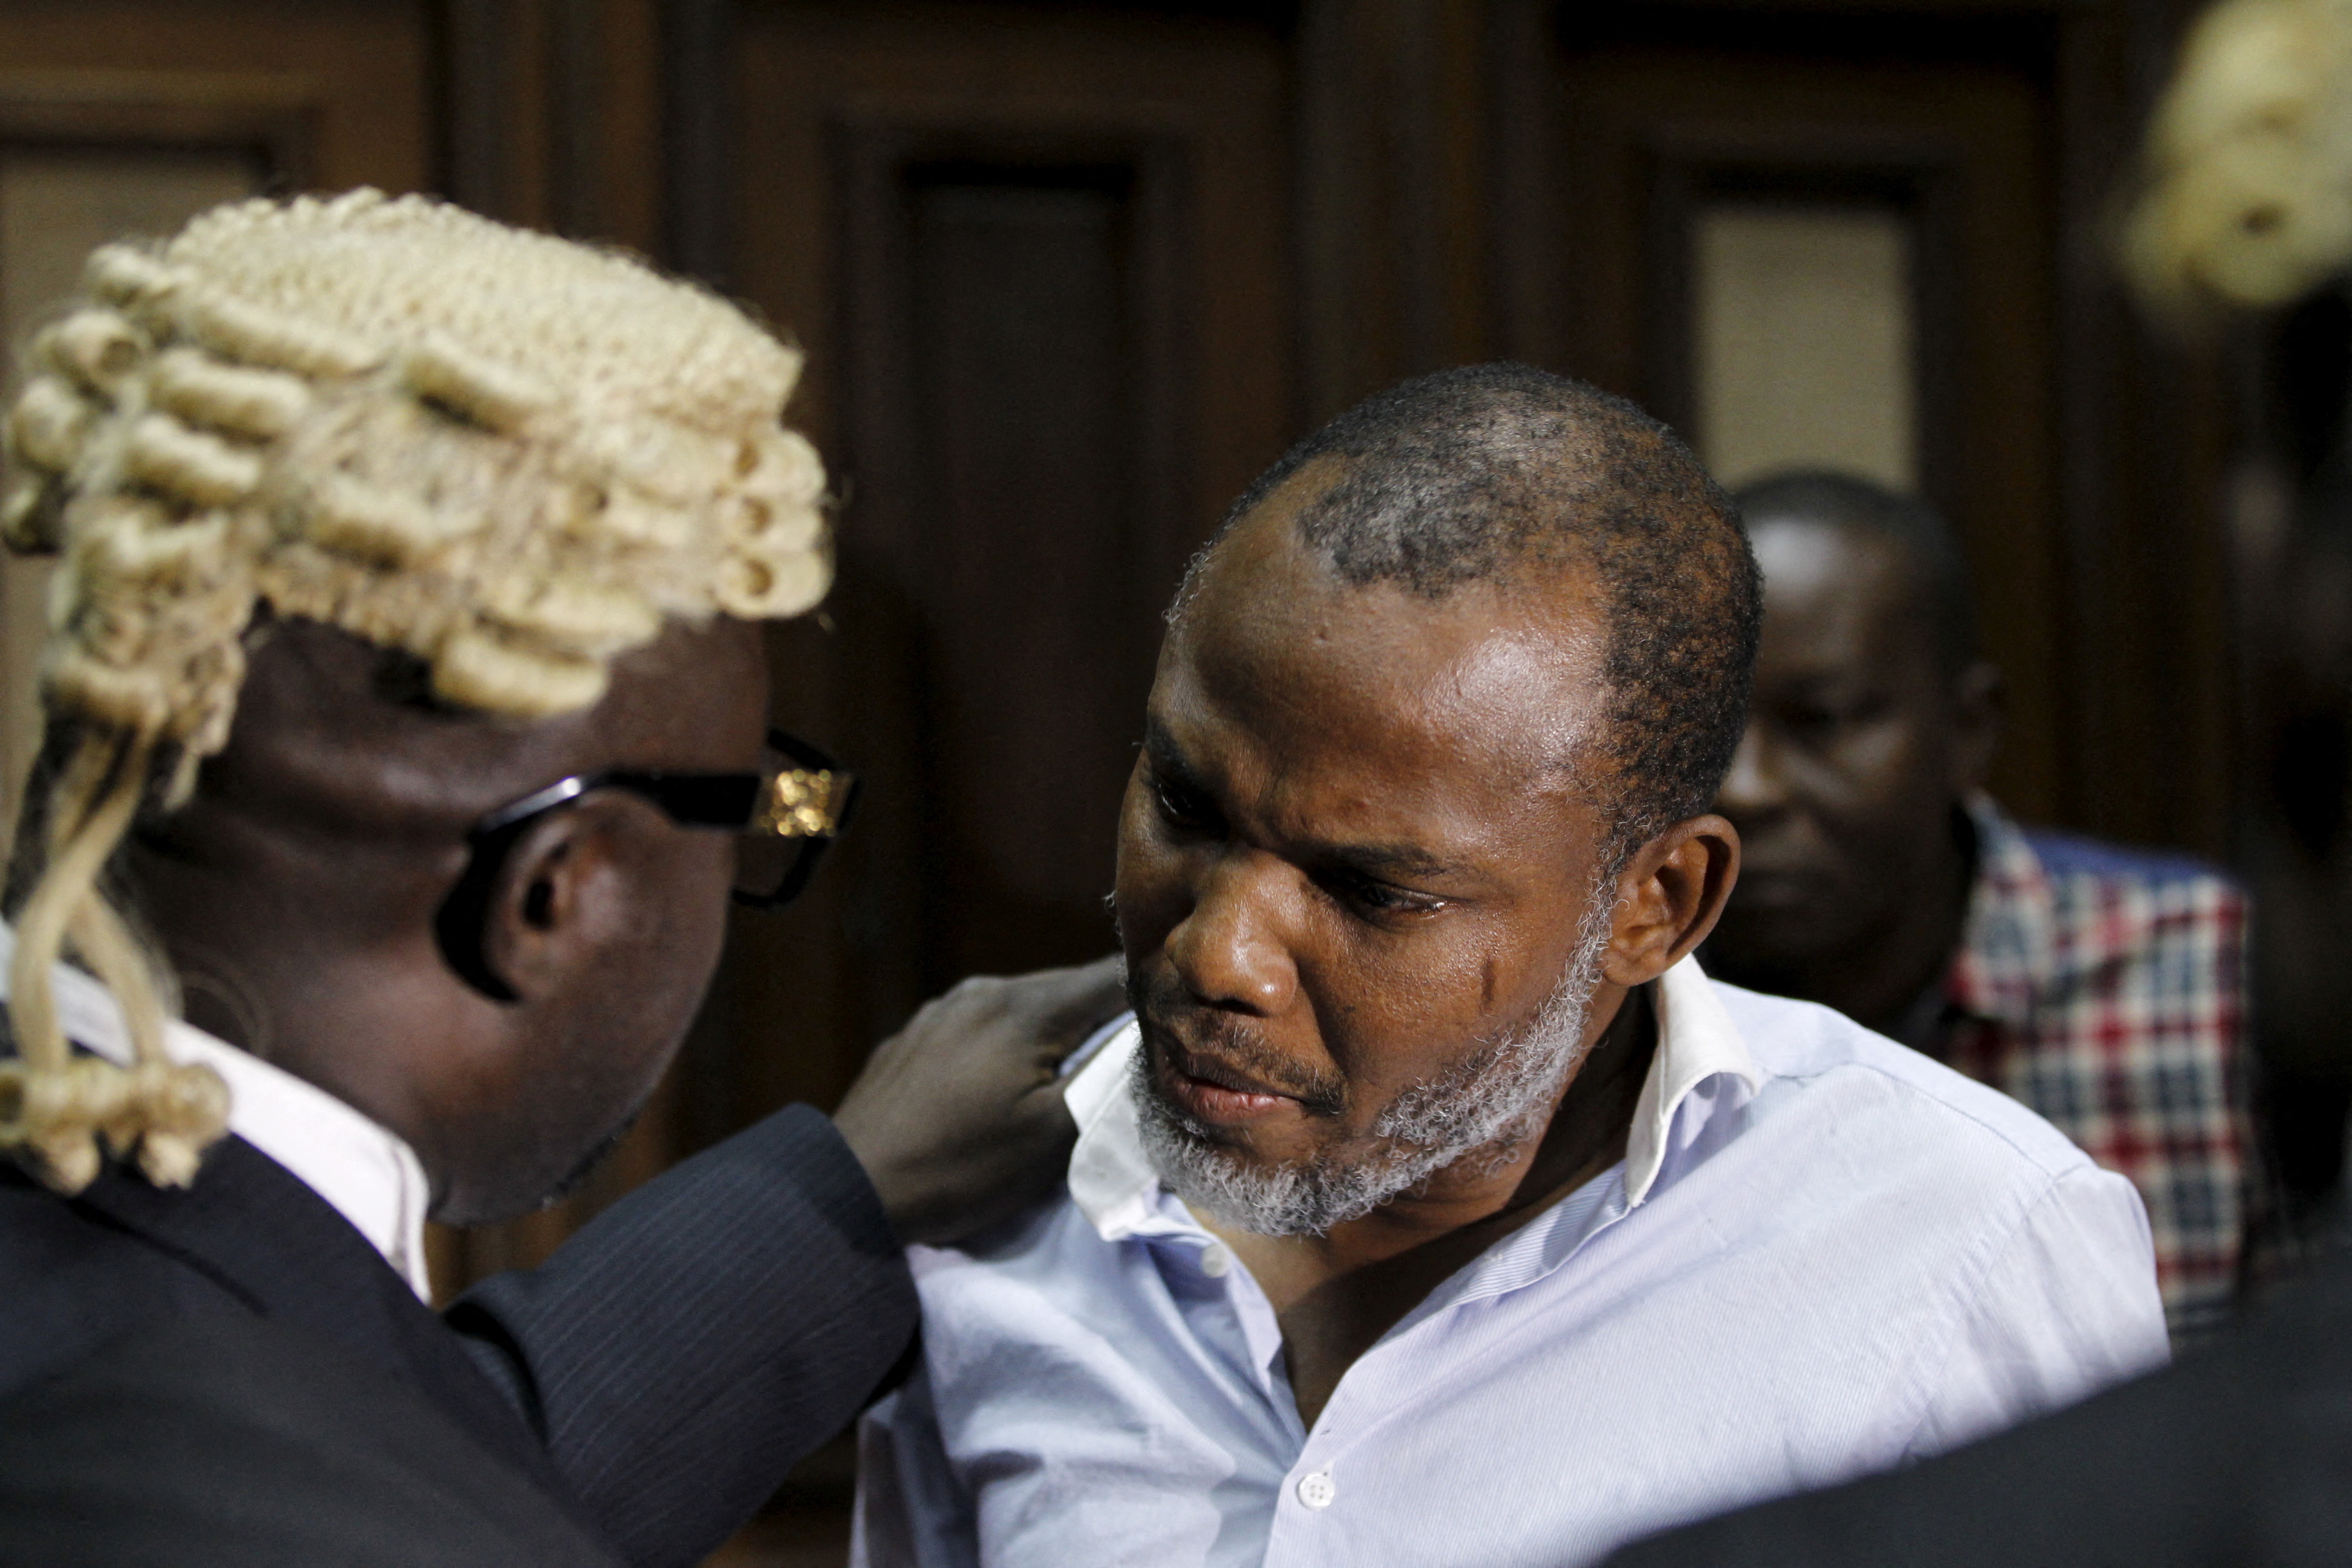 Indigenous People of Biafra (IPOB) leader Nnamdi Kanu seen with his counsel at the Federal high court Abuja, Nigeria